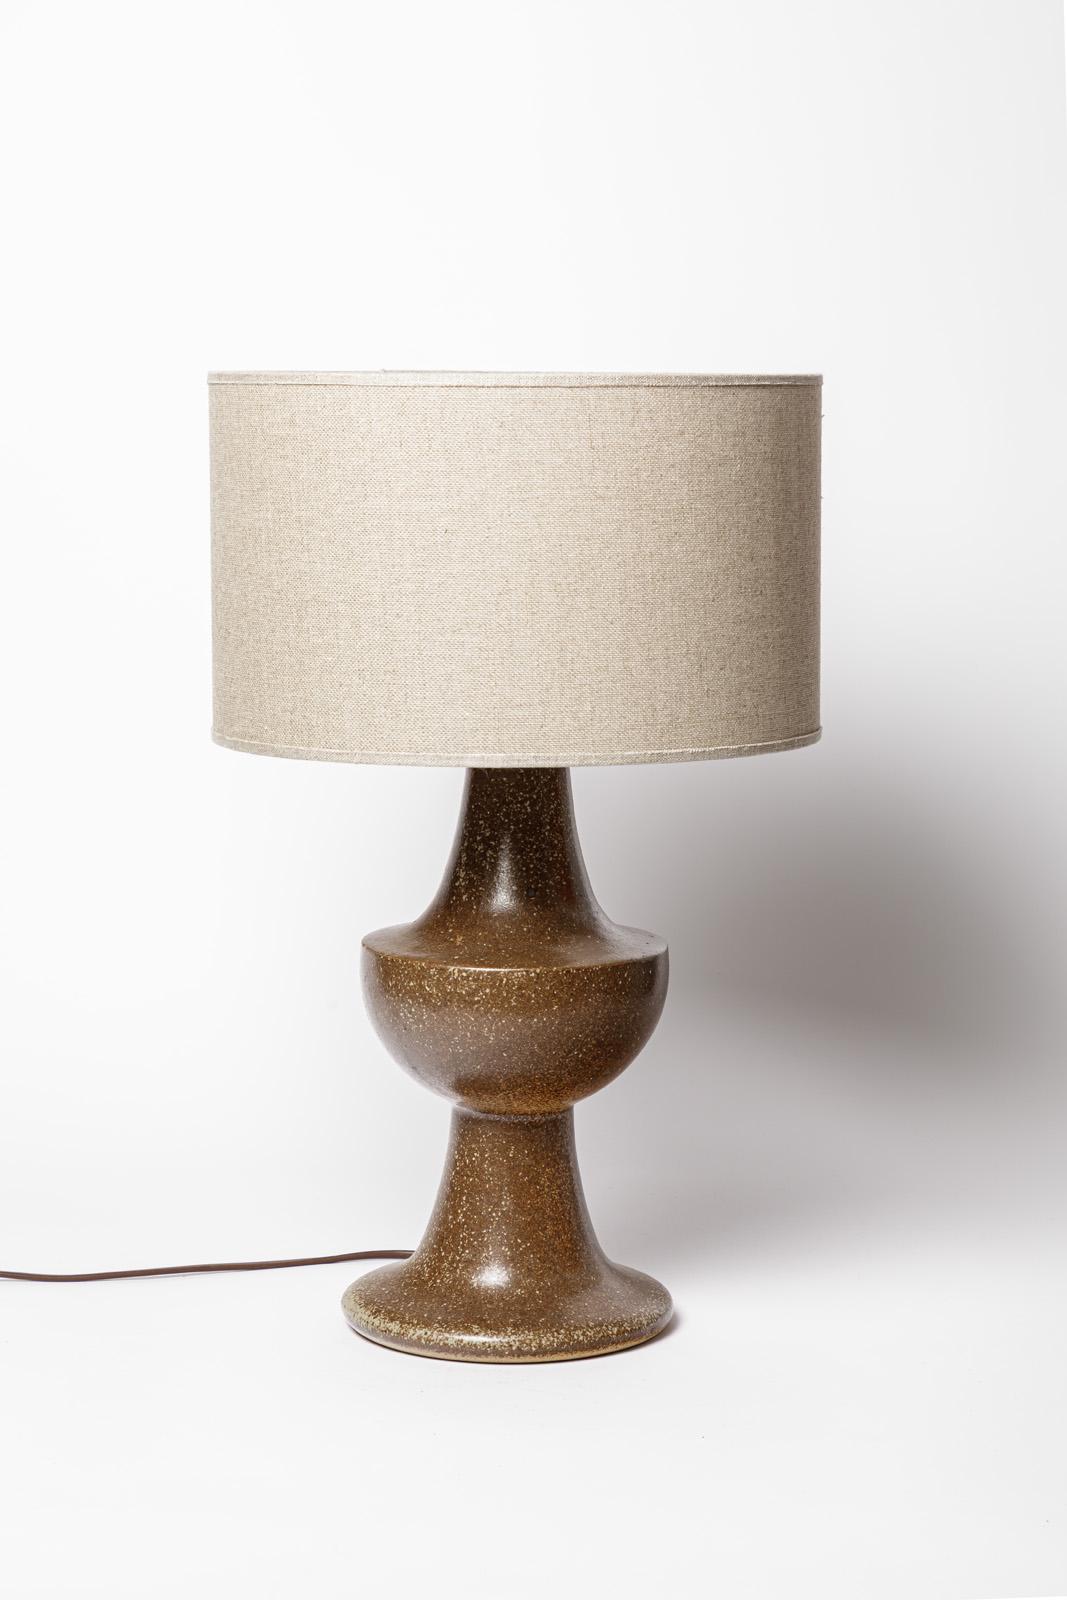 20th century design brown stoneware ceramic table lamp circa 1960 In Excellent Condition For Sale In Neuilly-en- sancerre, FR